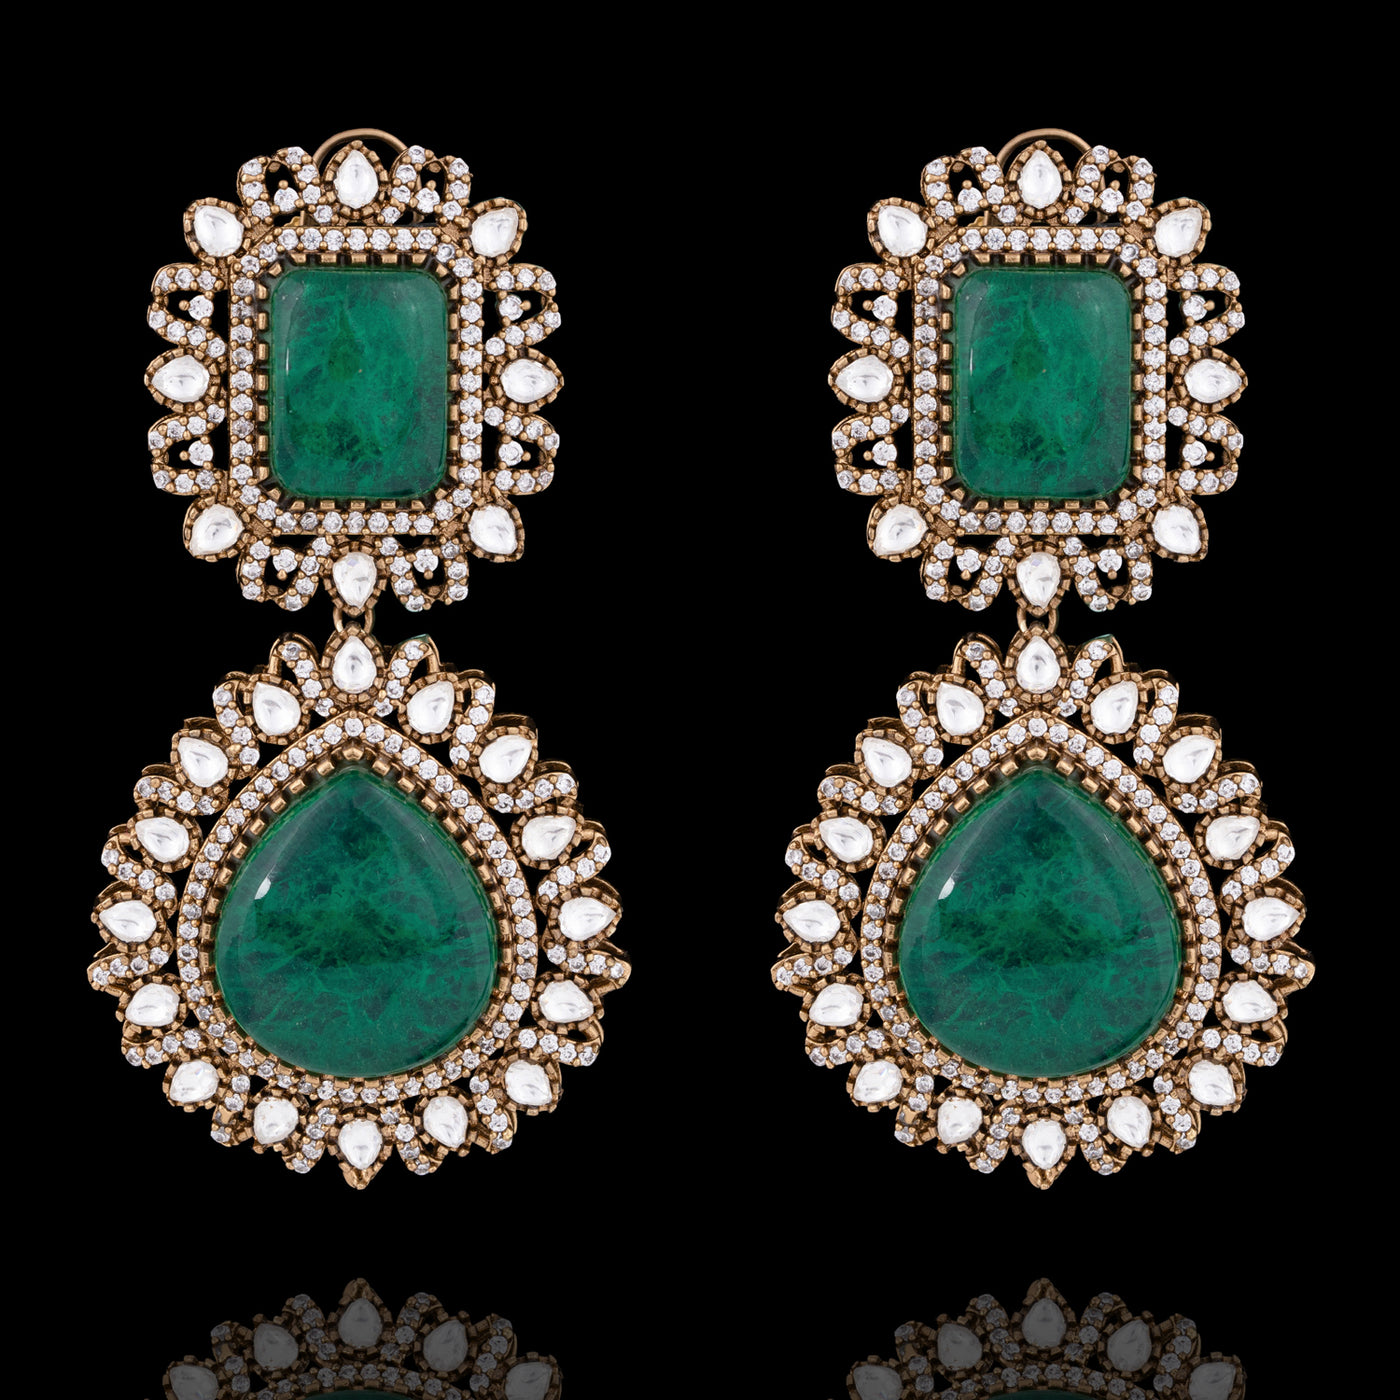 Meesha Earrings - Available in 3 Colors